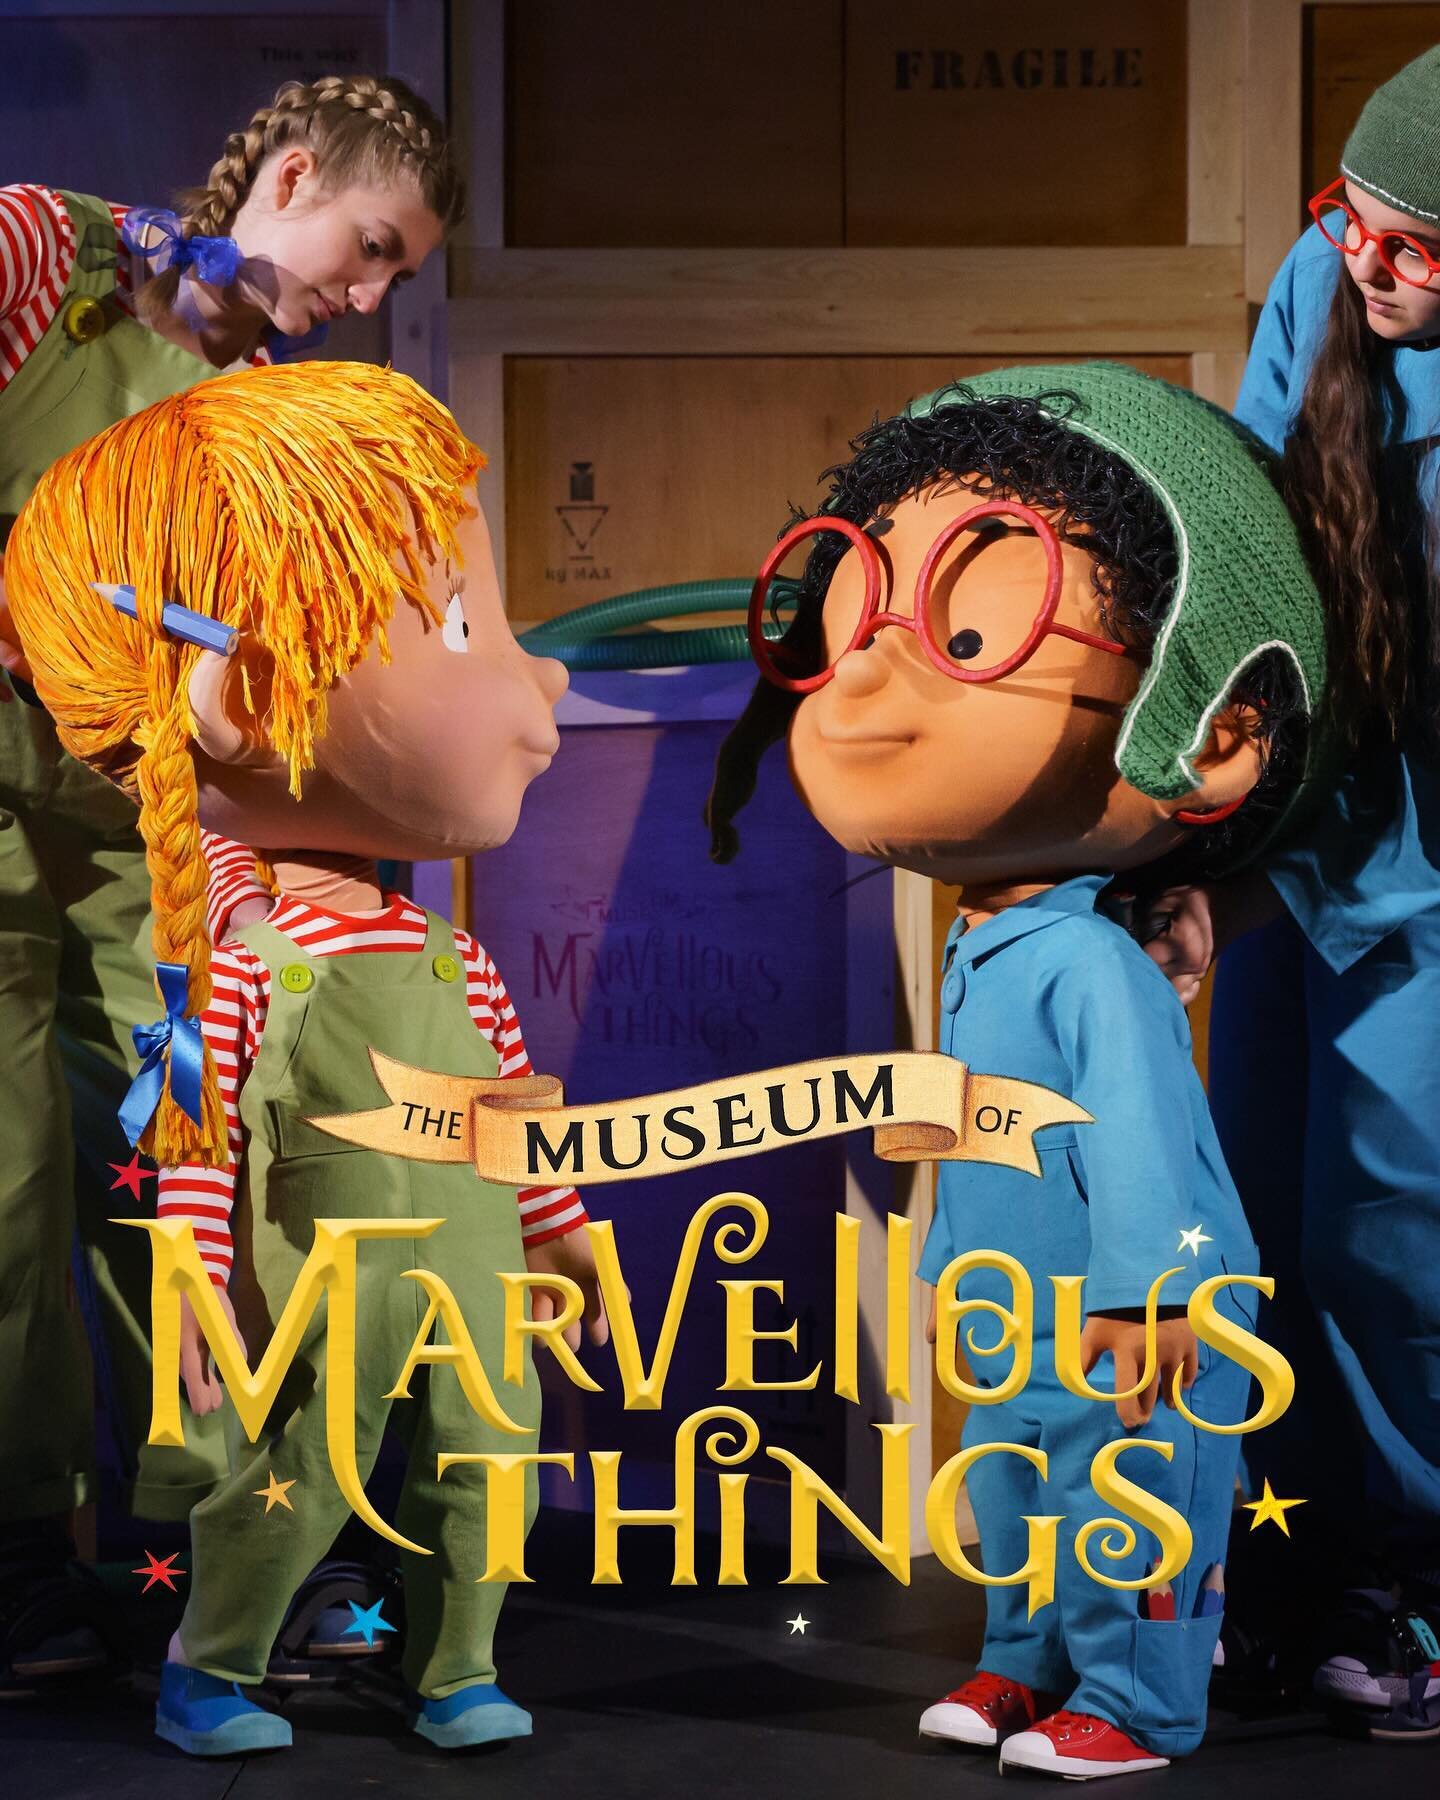 We are taking &lsquo;The Museum of Marvellous Things&rsquo; to Newcastle this weekend, and we couldn&rsquo;t be more excited. We love working in the NE and this is going to be a brilliant final stop on our Autumn Tour.

Thanks to @northtynesidecounci